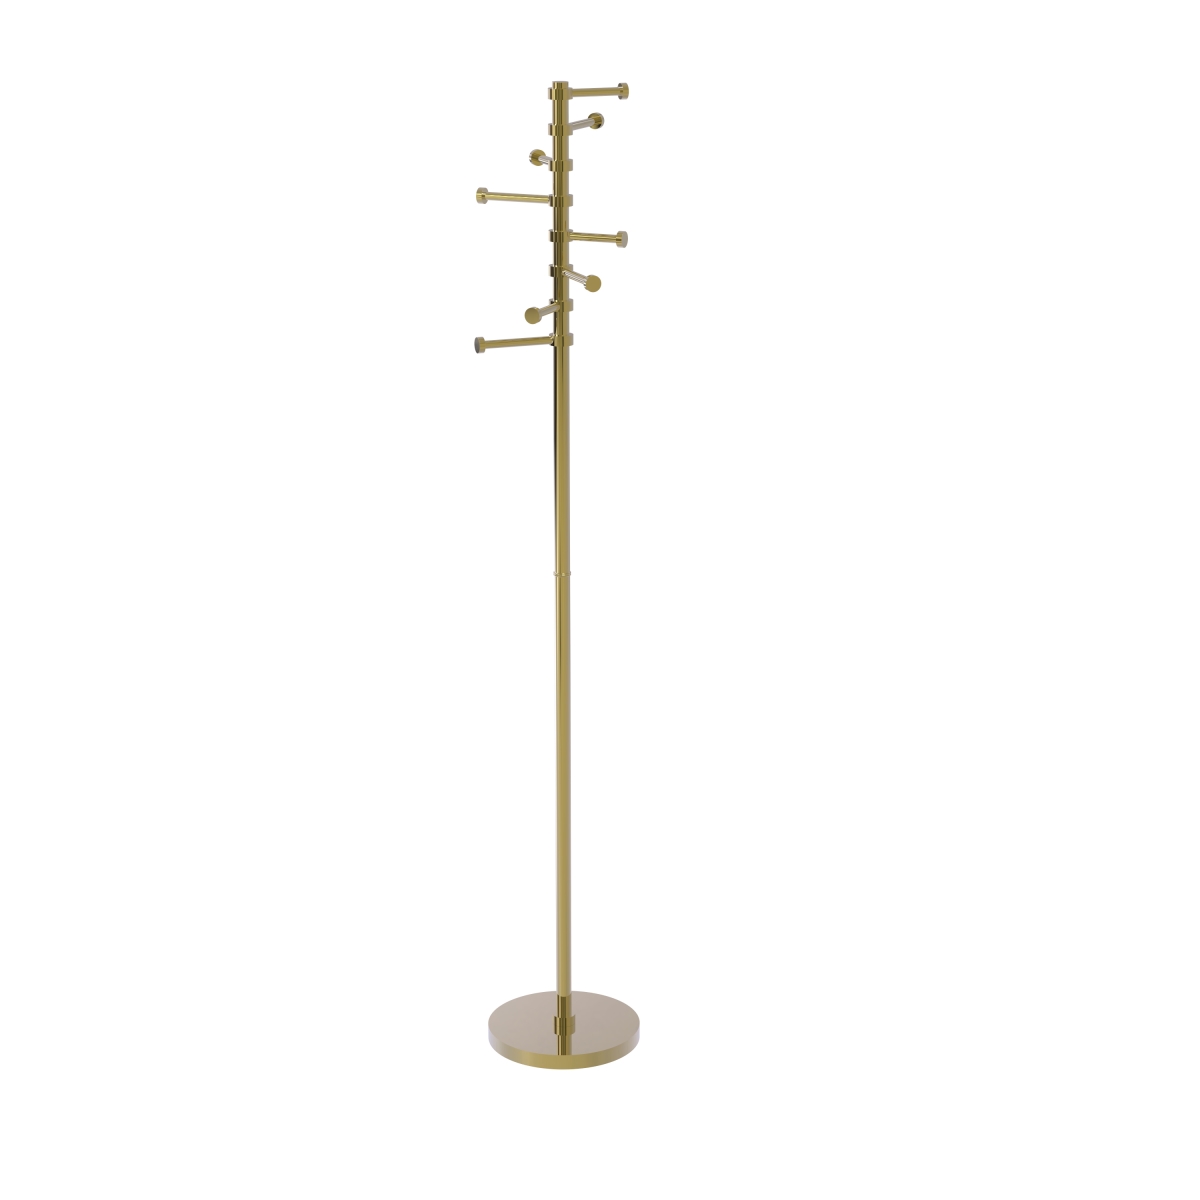 Picture of Allied Brass CS-1-UNL Free Standing Coat Rack with Six Pivoting Pegs, Unlacquered Brass